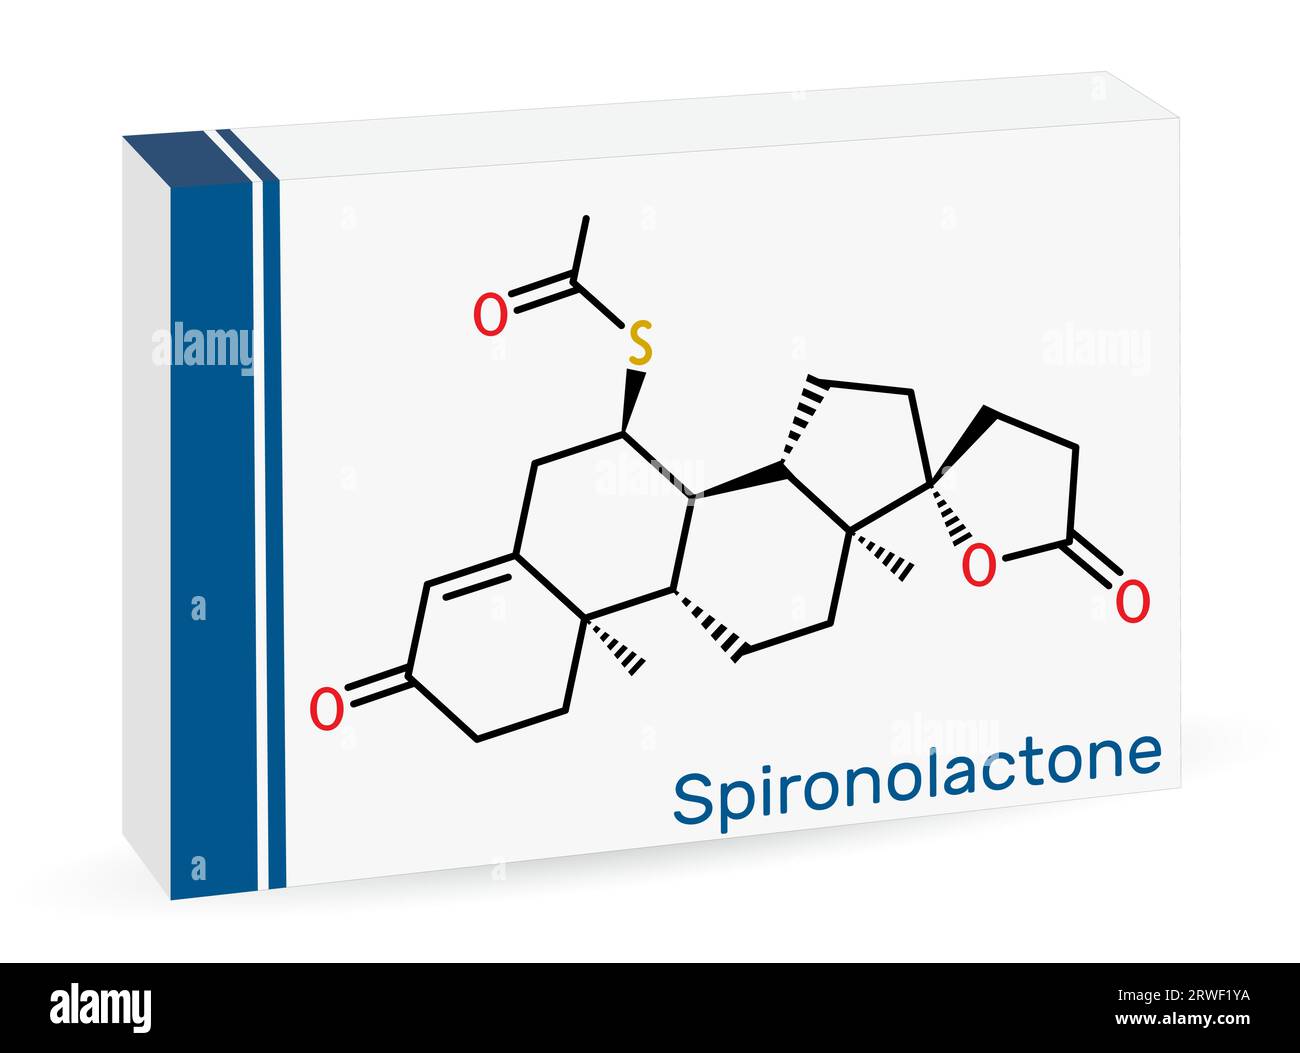 Spironolactone molecule. It is aldosterone receptor antagonist used for the treatment of hypertension, hyperaldosteronism, edema. Skeletal chemical fo Stock Vector